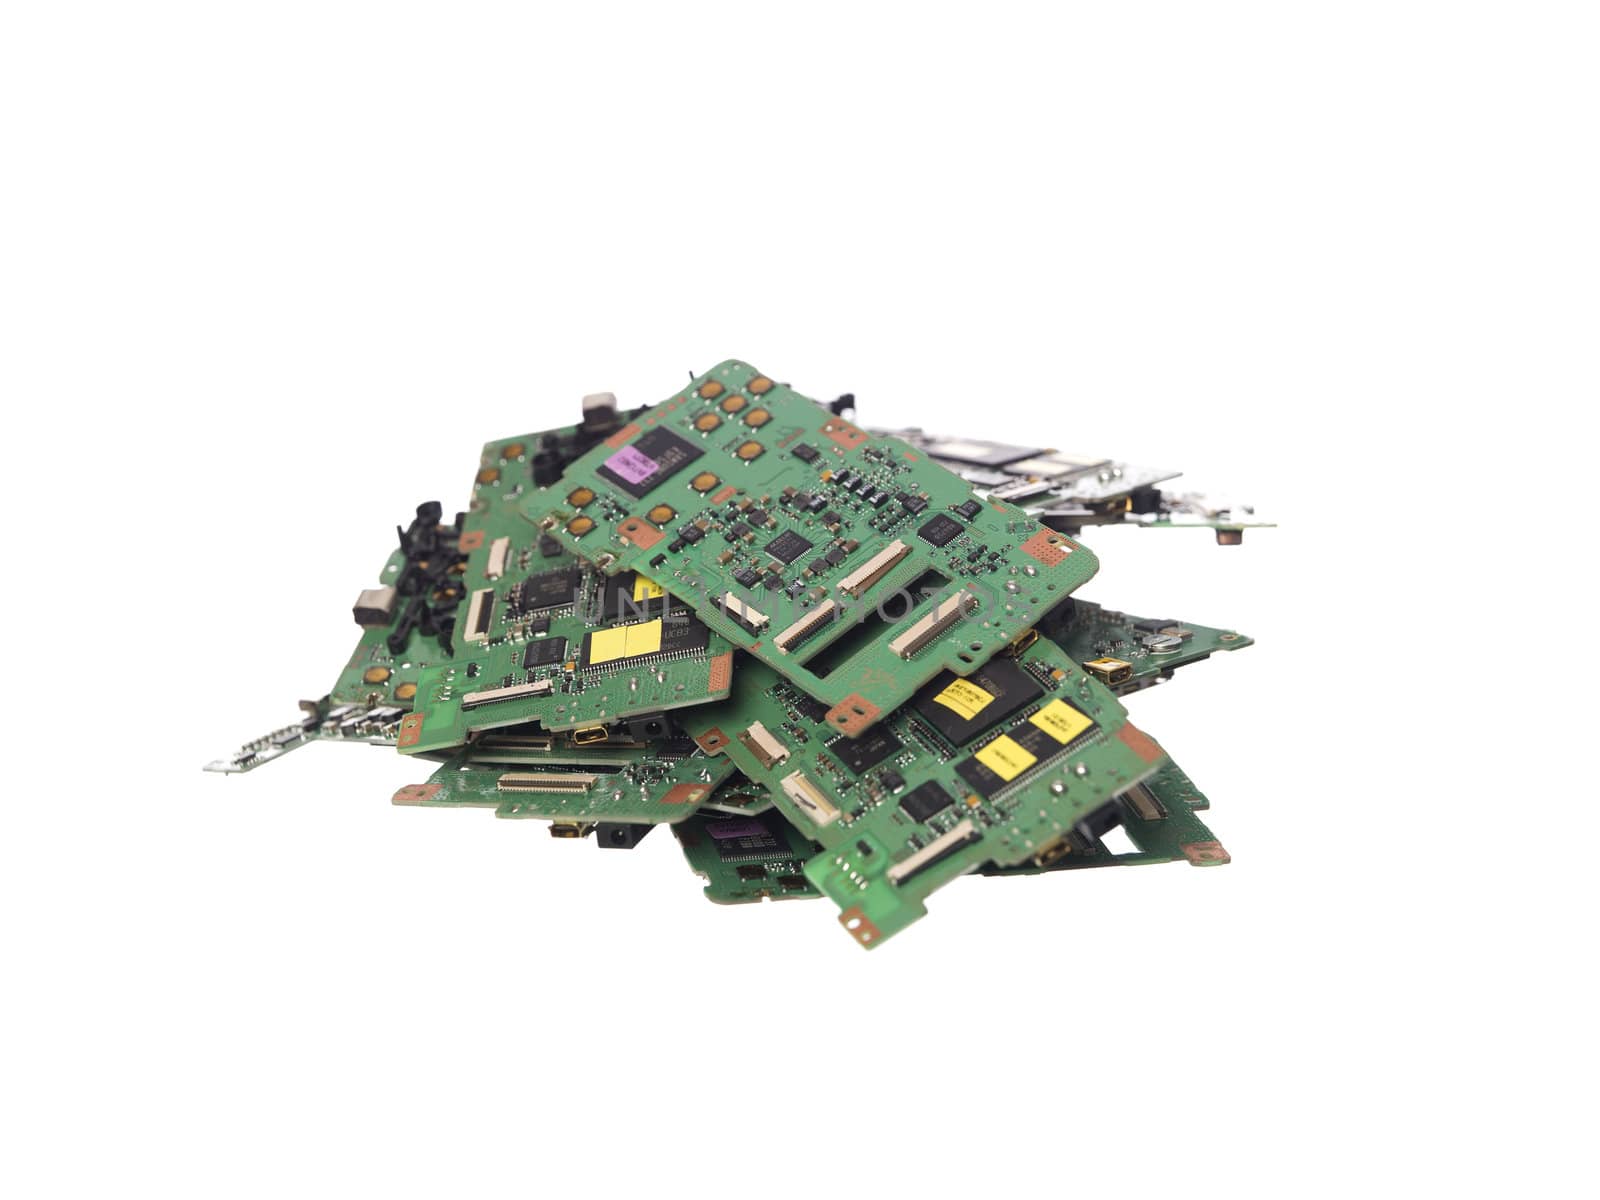 Stack of circuit cards